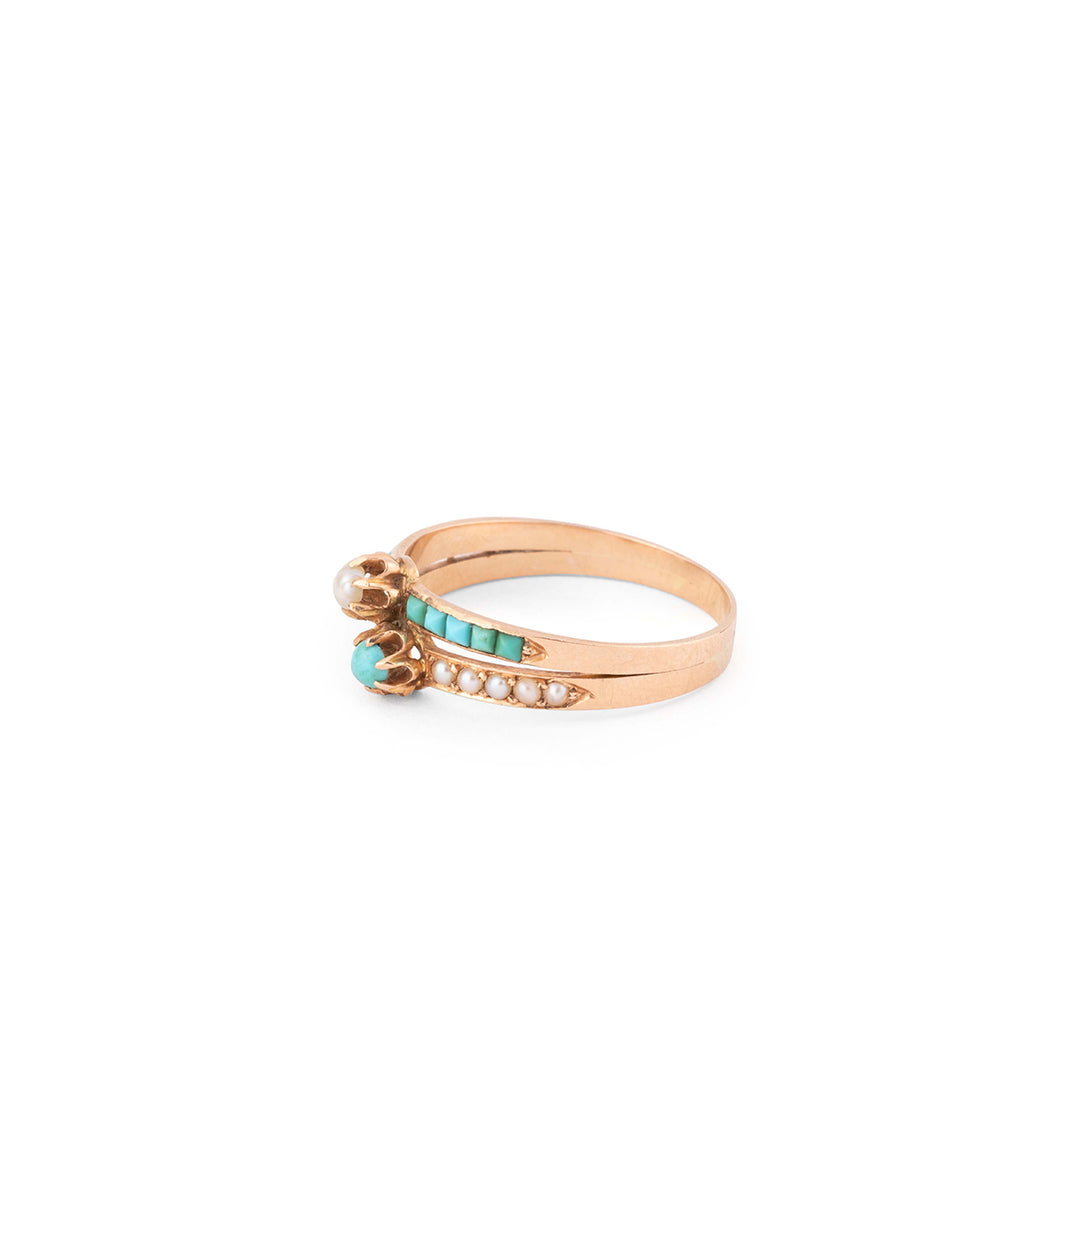 Antique toi et moi ring turquoise and pearl "Baya" - Caillou Paris